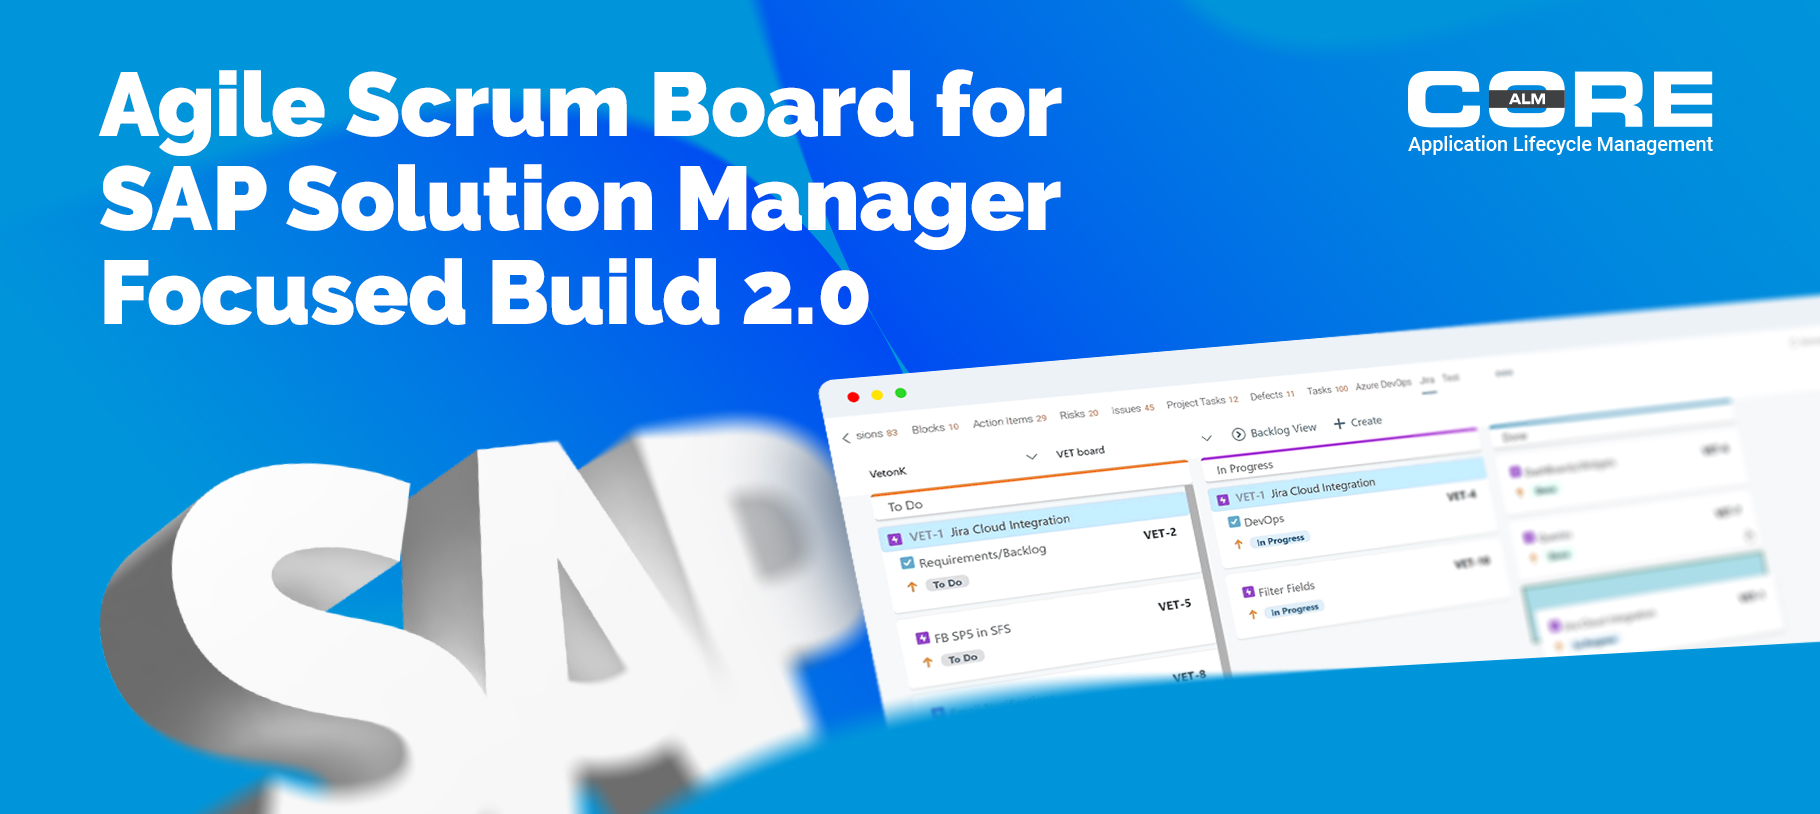 Agile Scrum Board For SAP Solution Manager Focused Build 2.0